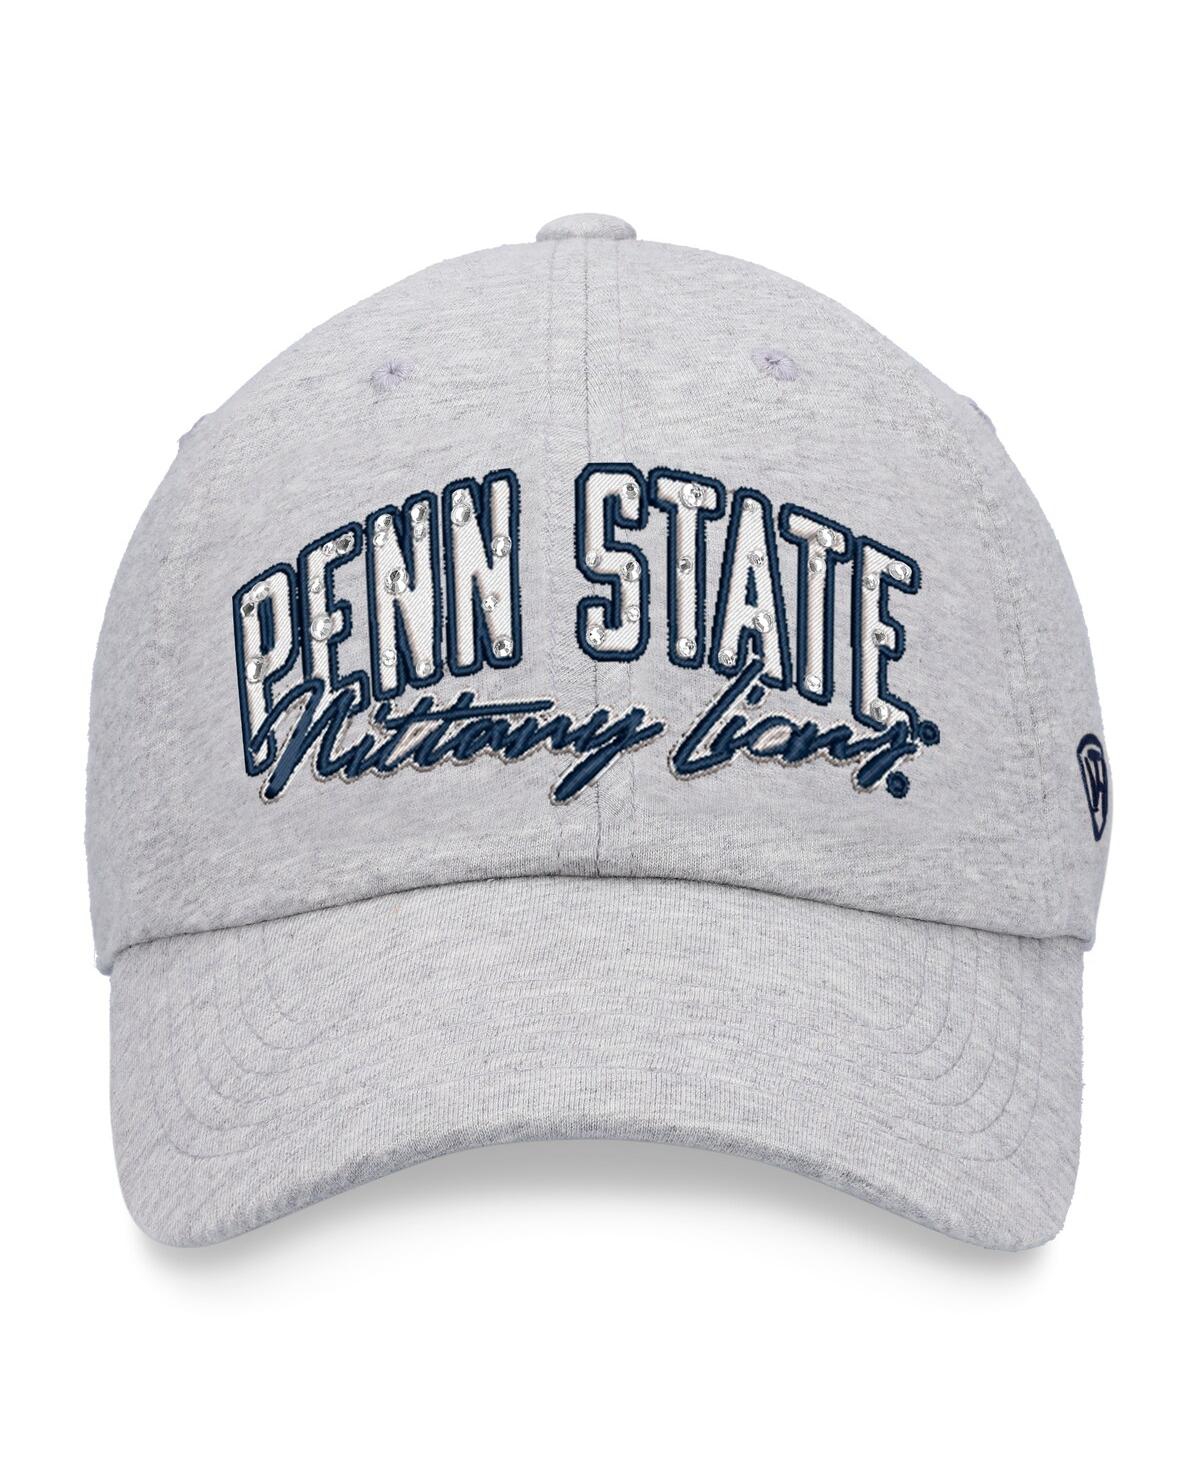 Shop Top Of The World Women's  Heathered Gray Penn State Nittany Lions Christy Adjustable Hat